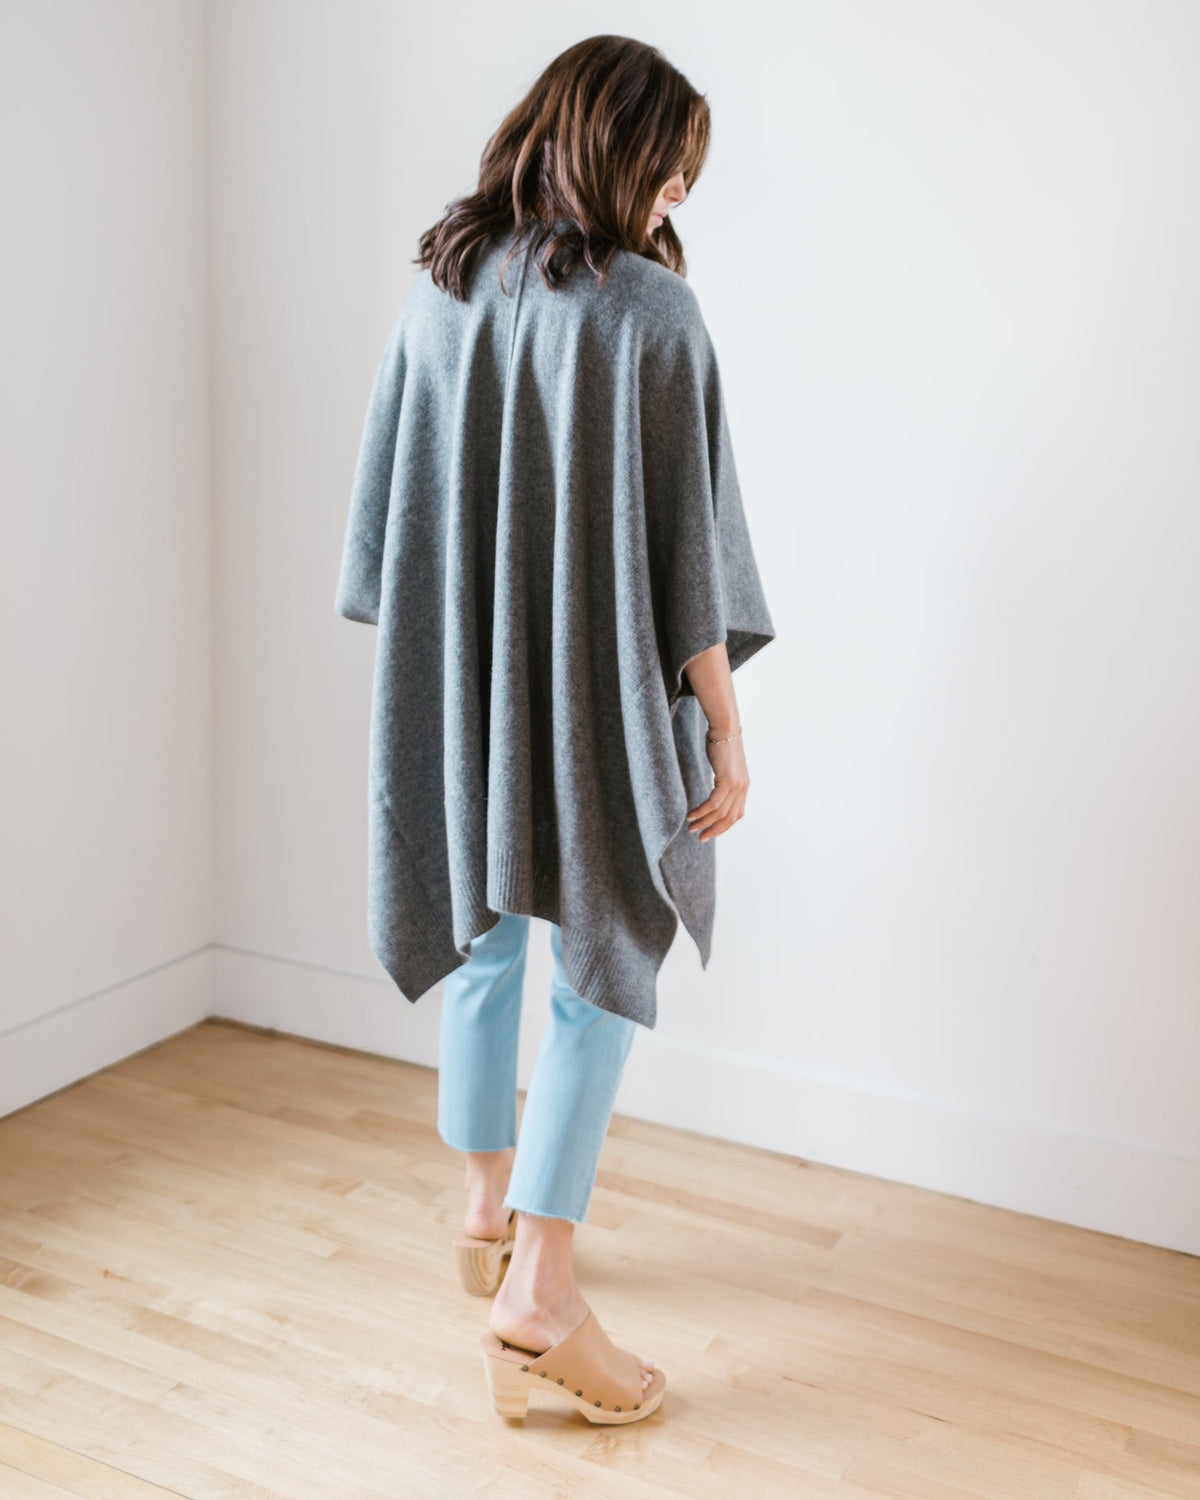 Margaret O'Leary Clothing Cashmere Cape in Pewter